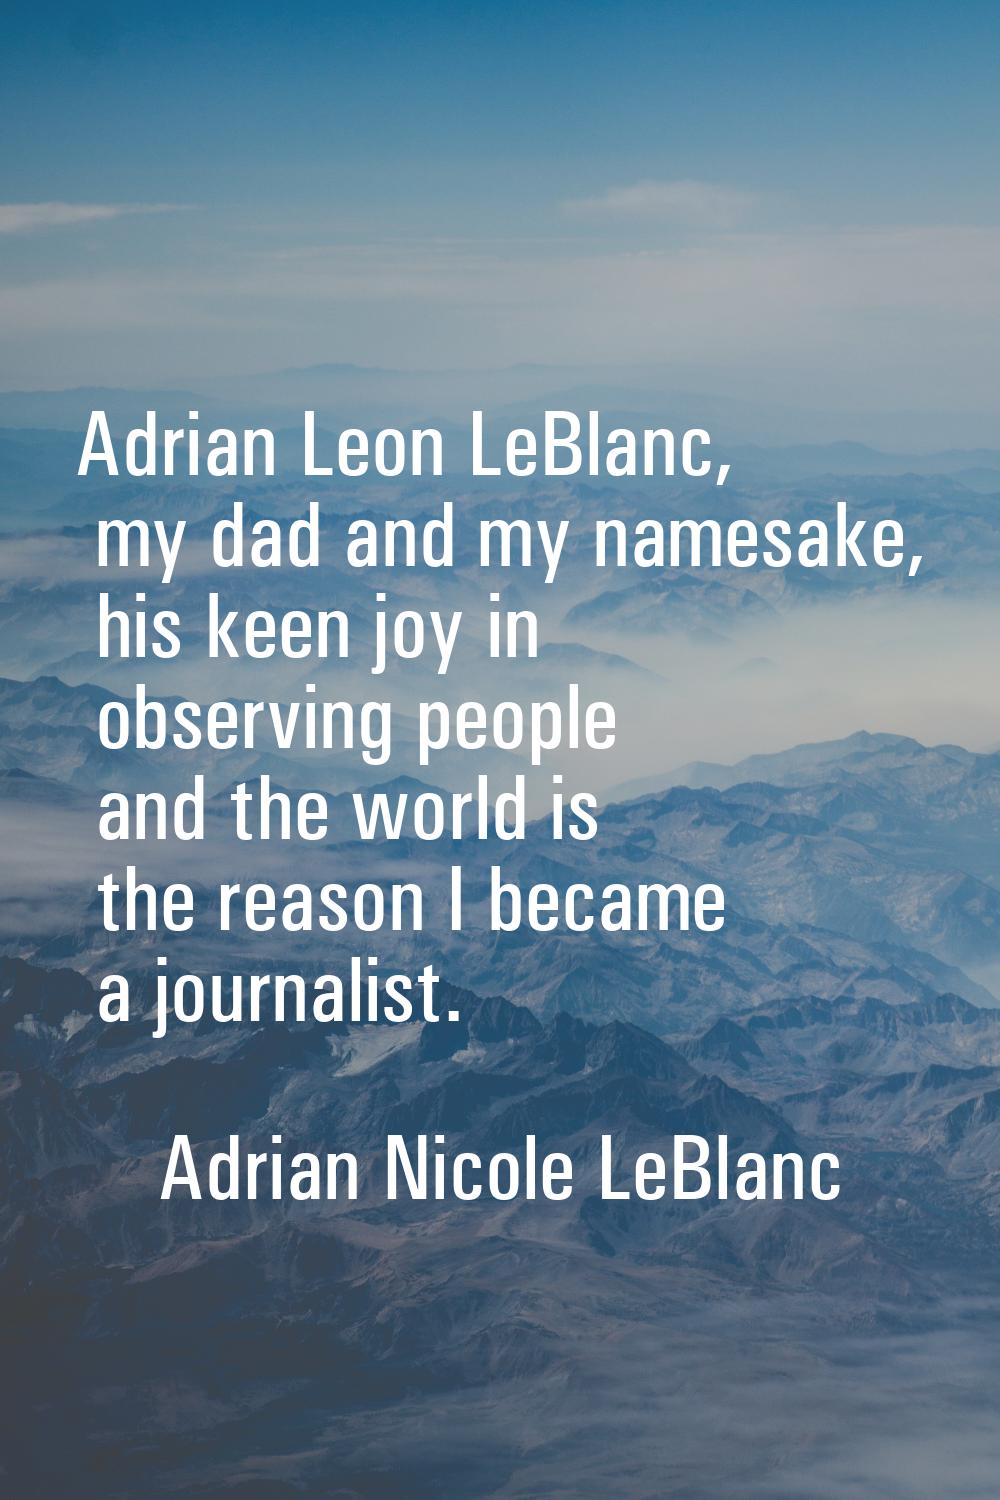 Adrian Leon LeBlanc, my dad and my namesake, his keen joy in observing people and the world is the 